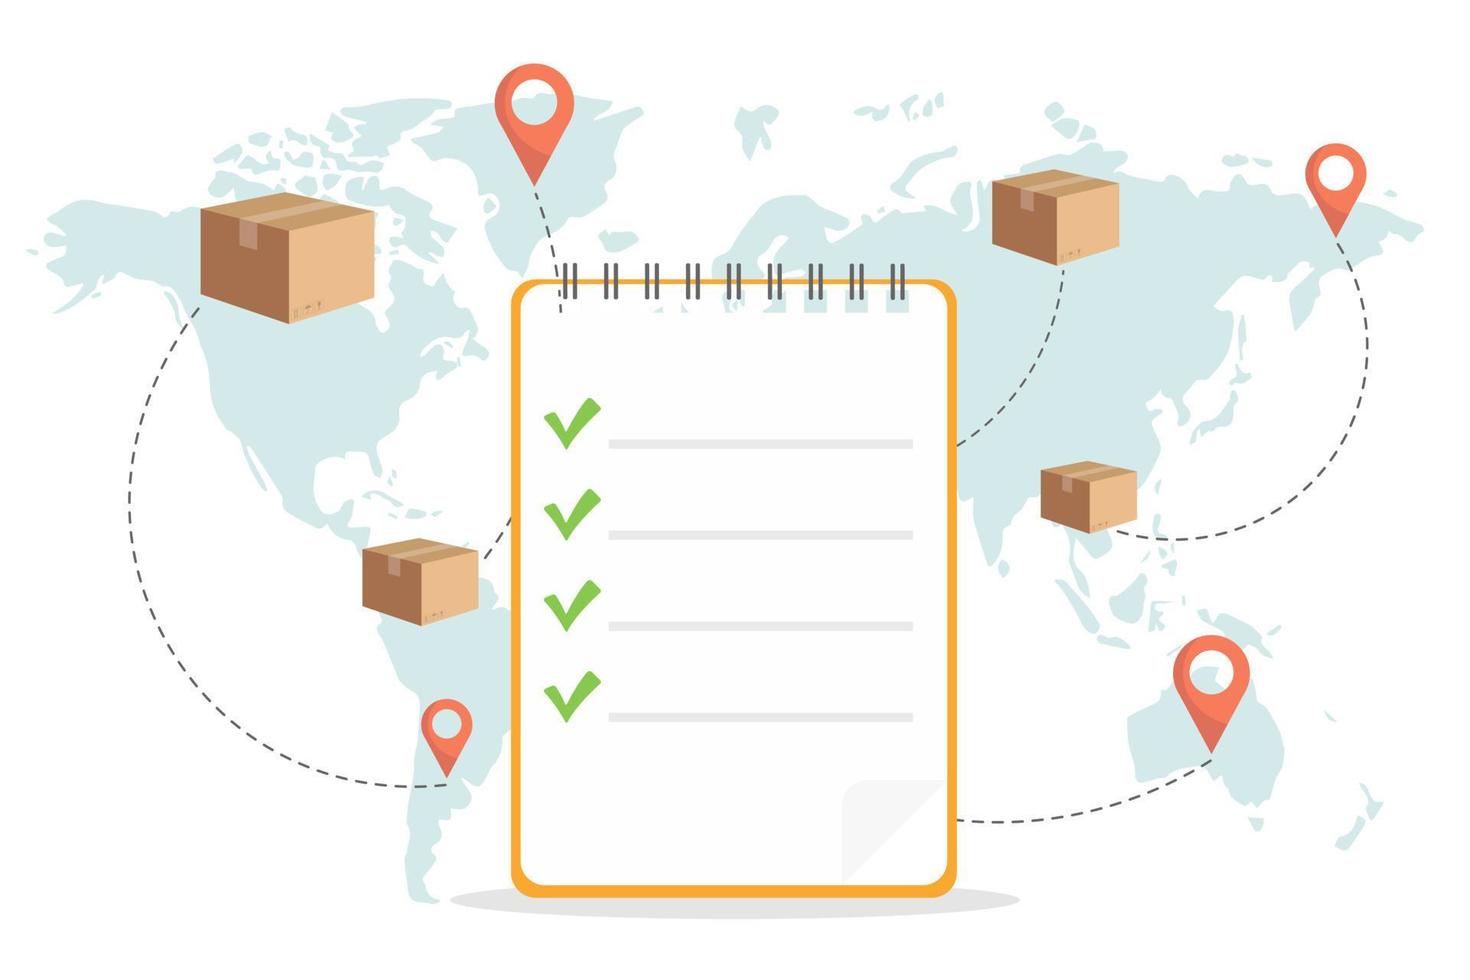 Fulfilled orders, fast parcel delivery. Global logistics network. World map with cargo moving. vector